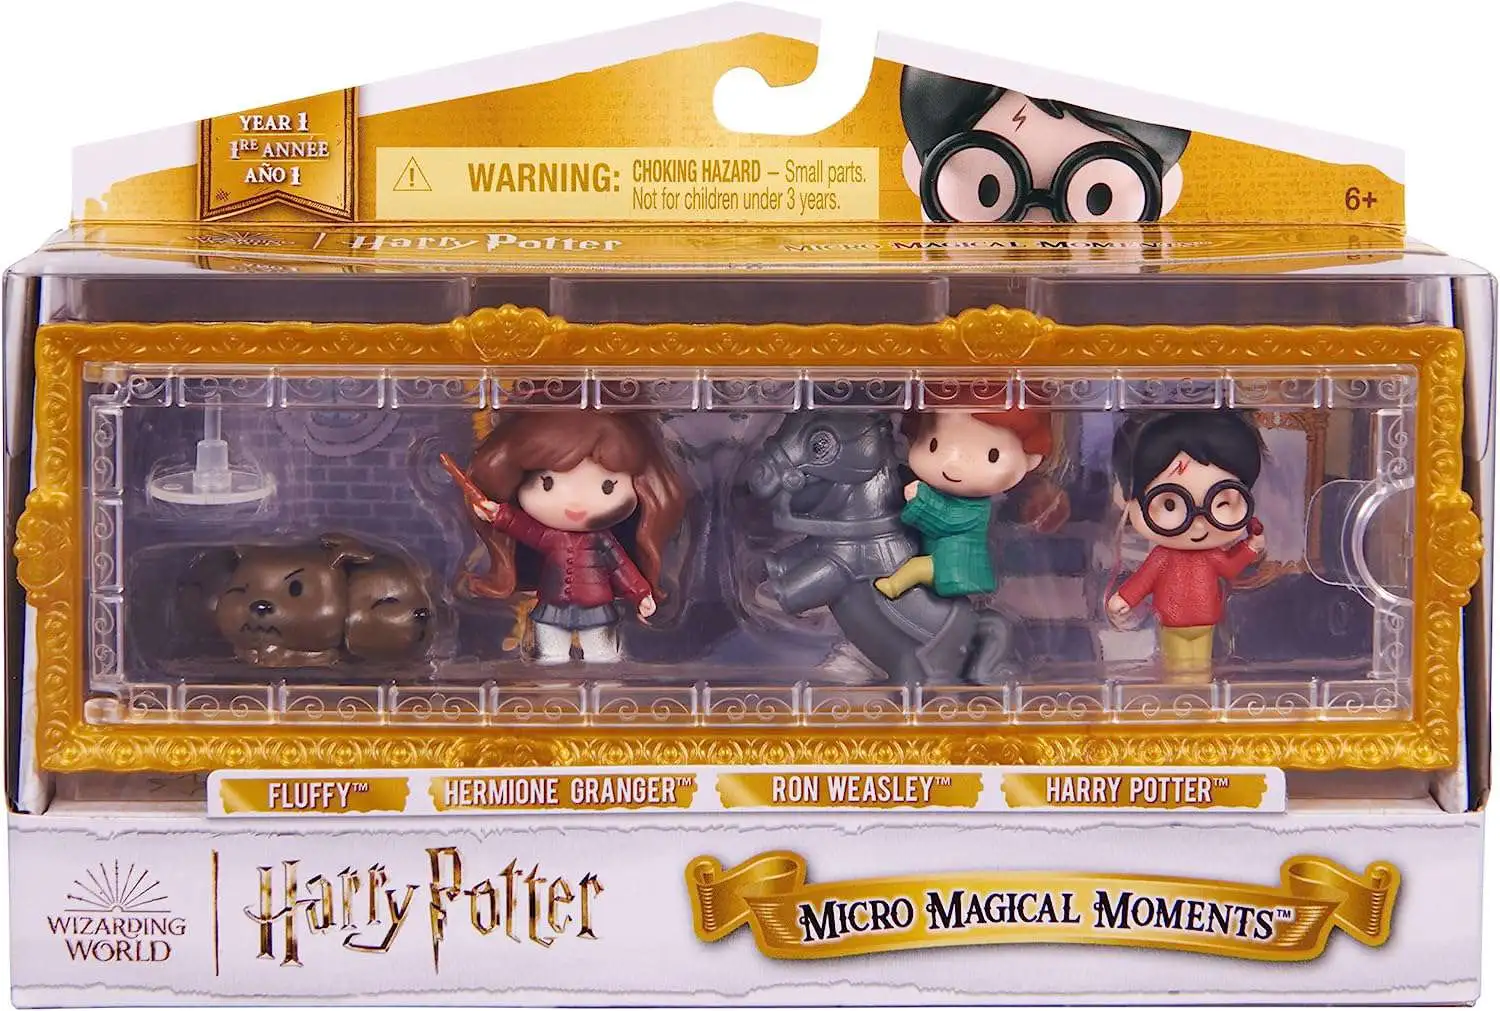 Harry Potter Micro Magical Moments Fluffy, Hermione Granger, Ron